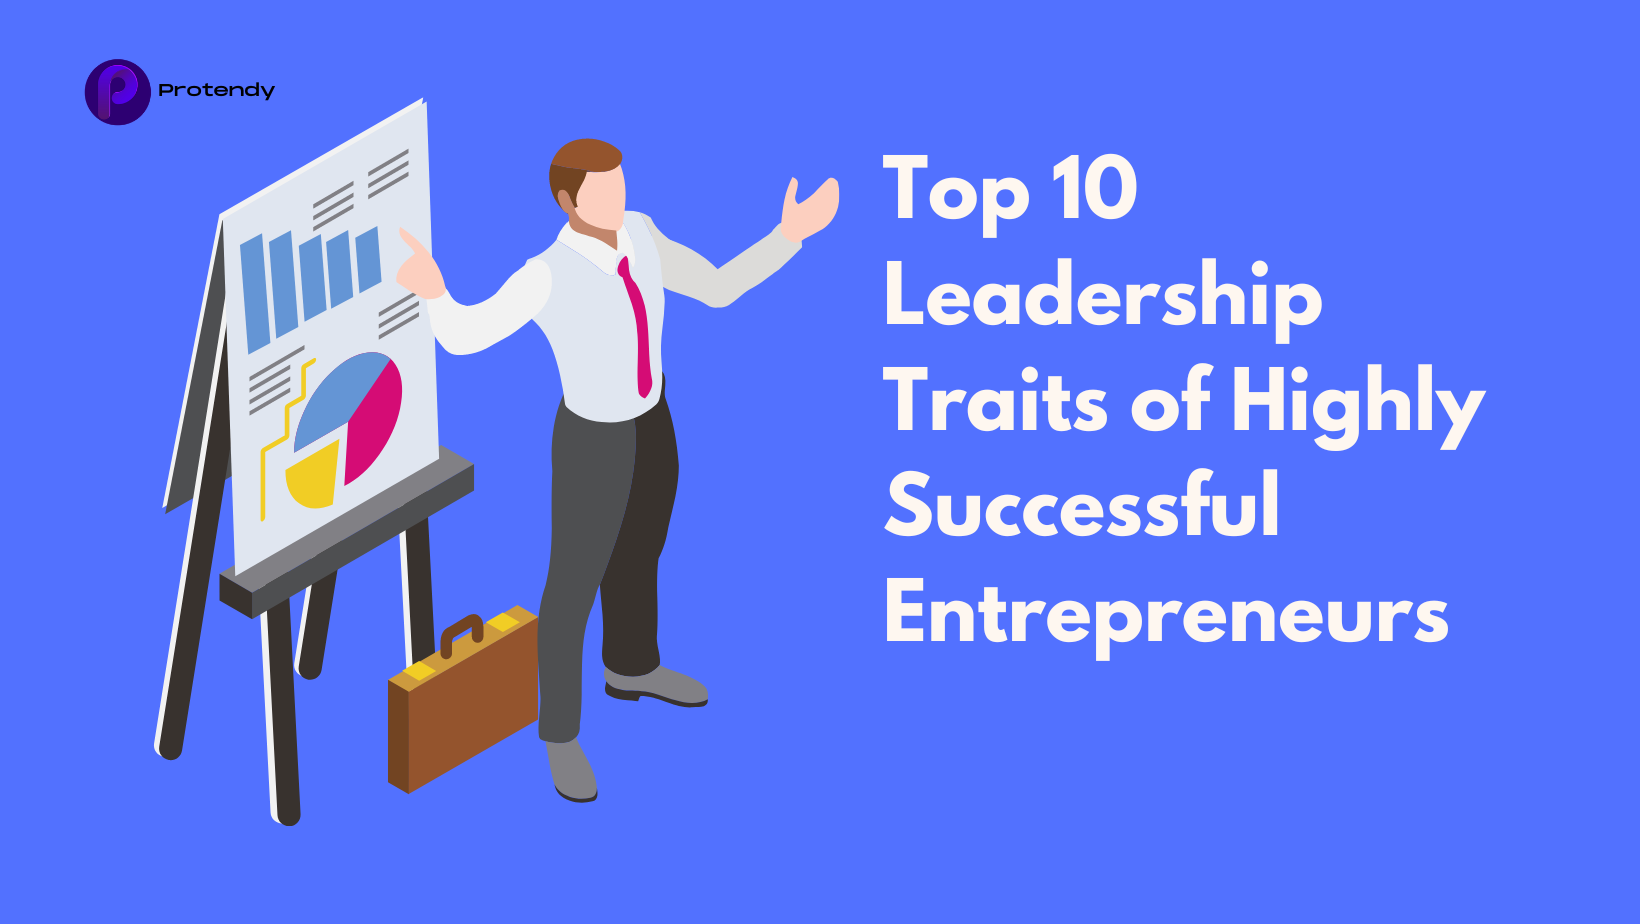 Top 10 Leadership Traits of Highly Successful Entrepreneurs